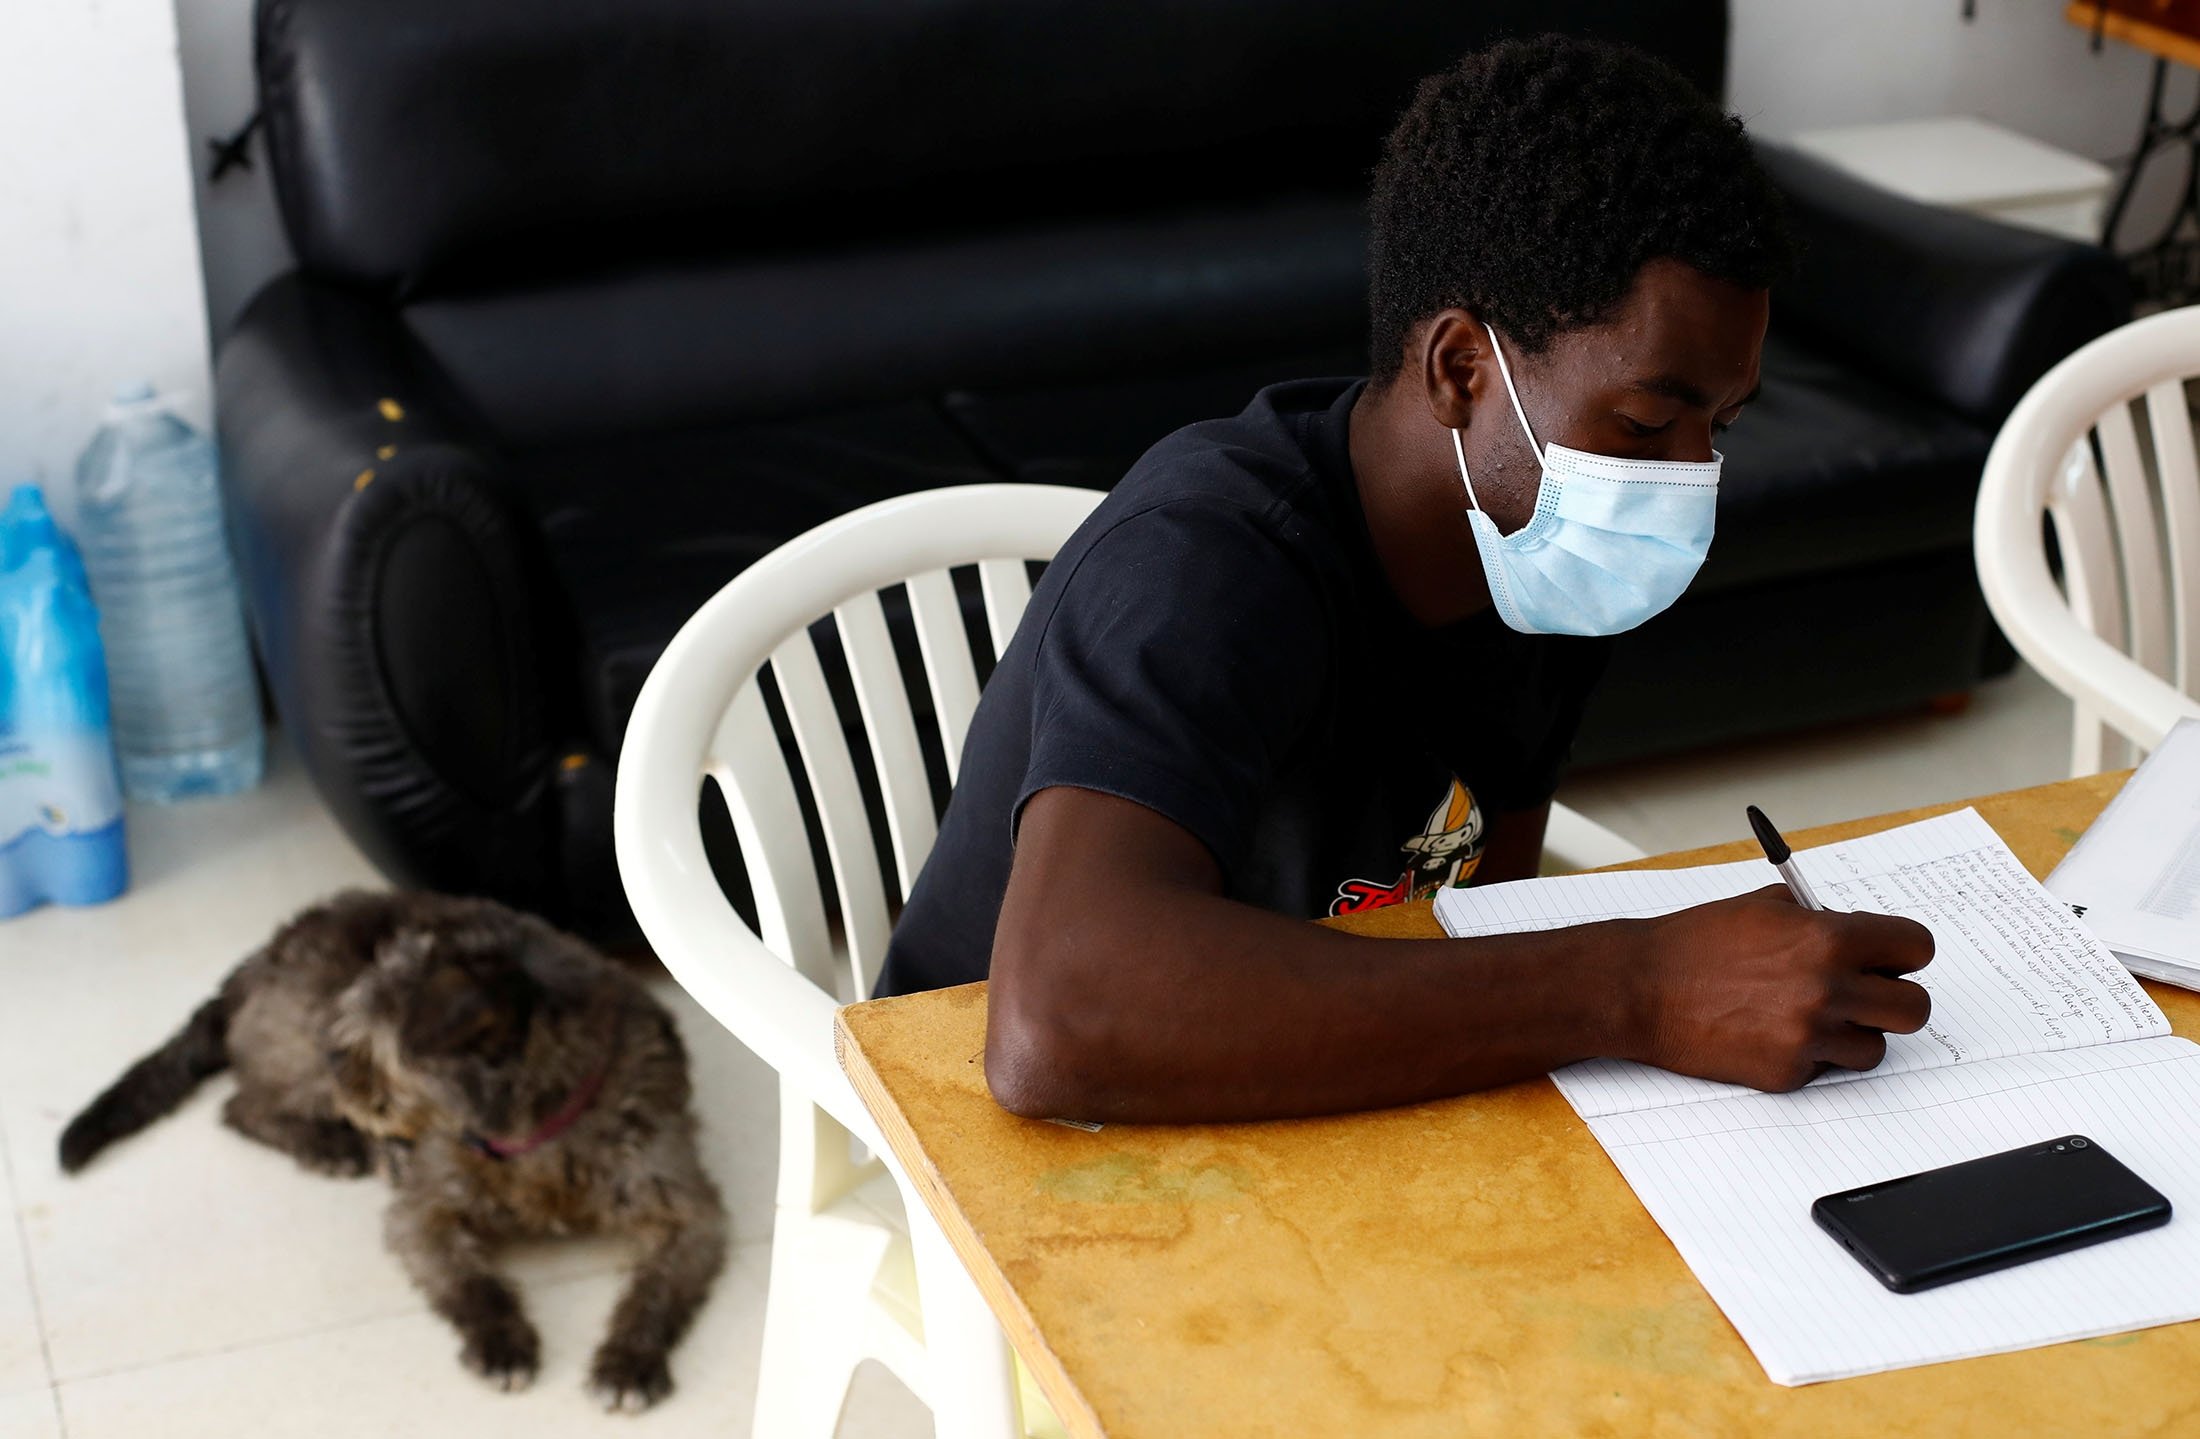 Mohamed Gueye, a Senegalese migrant who arrived on the island in a boat, receives Spanish lessons in Tito Martin